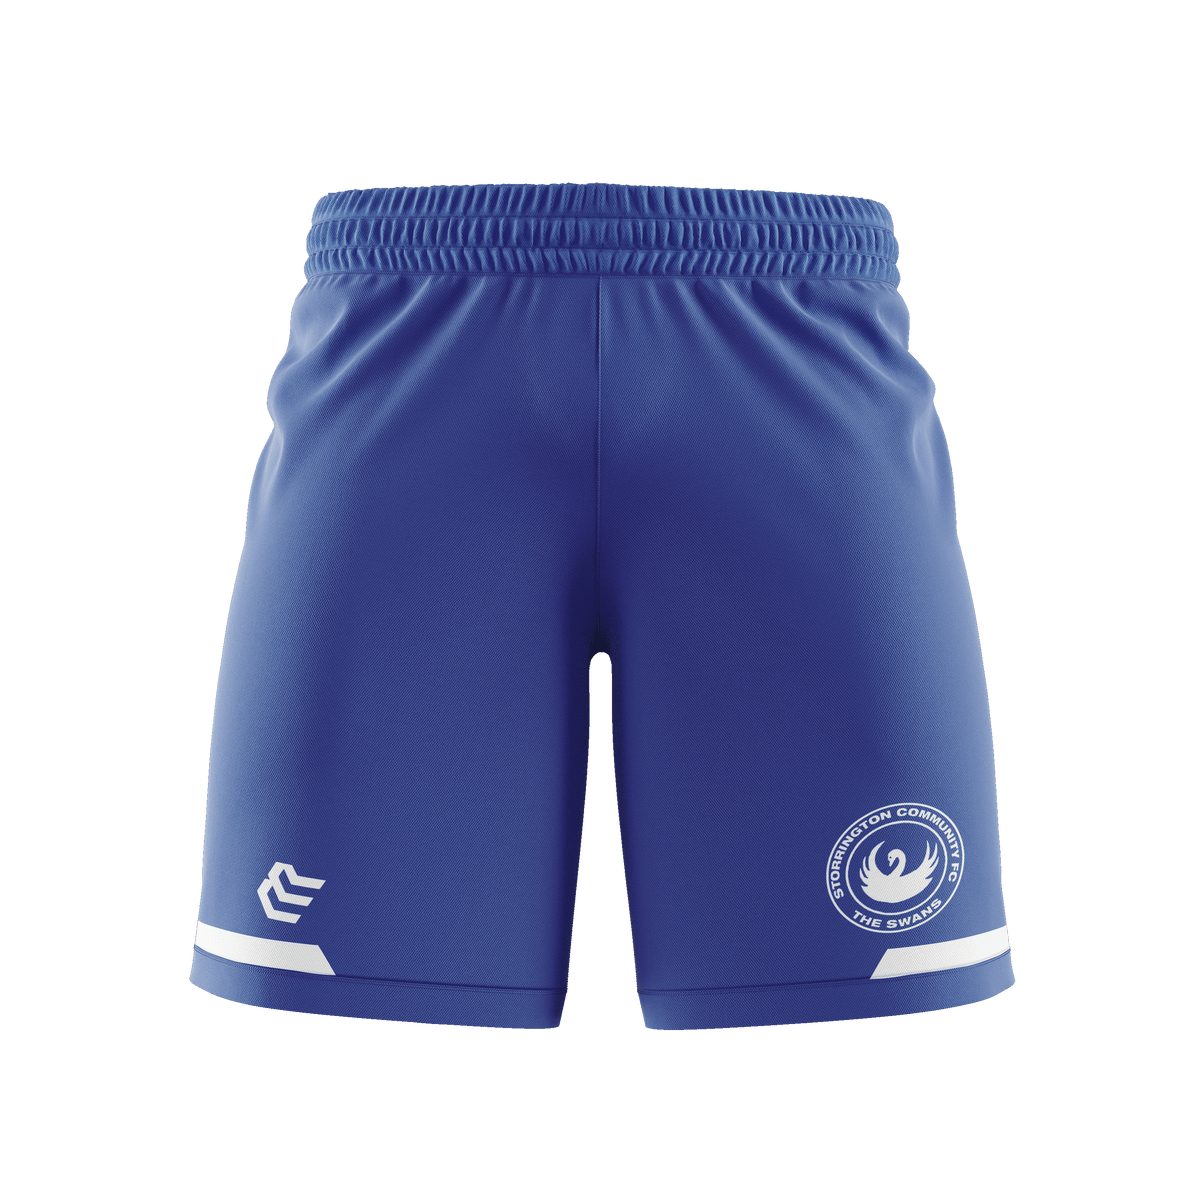 home_shorts_front_view.png__PID:b5396f2d-45c5-4464-8880-faba7d7760bc